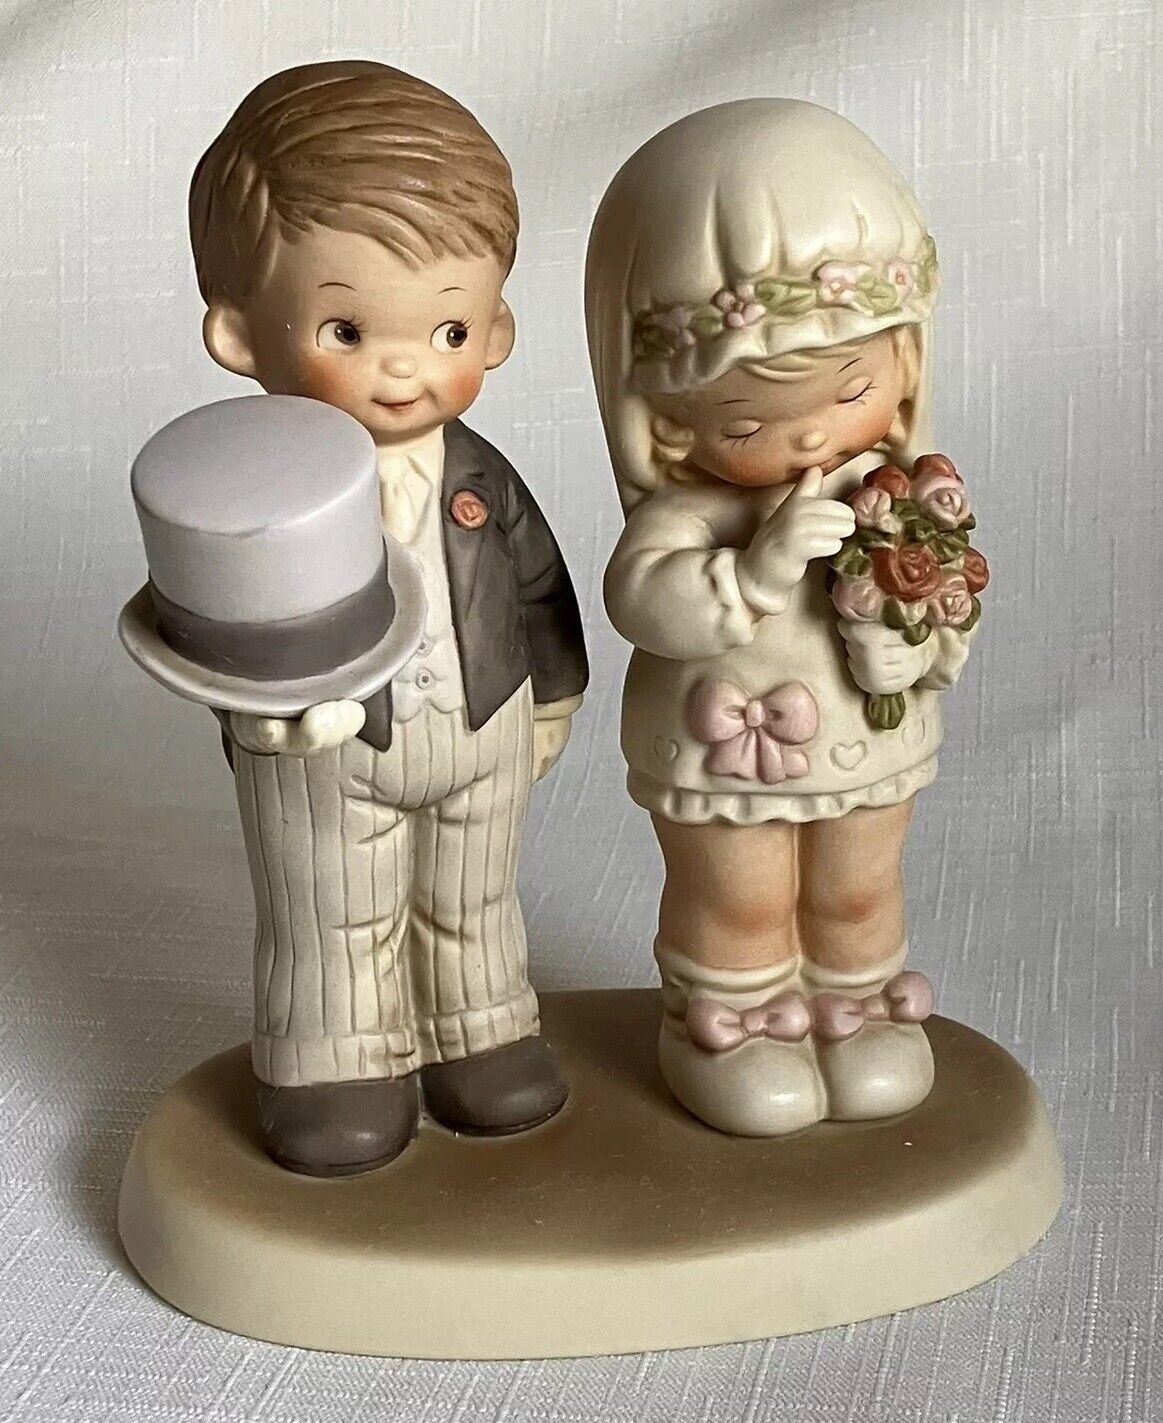 Enesco Memories Of Yesterday “Here Comes The Bride and Groom” Figurine (1988)